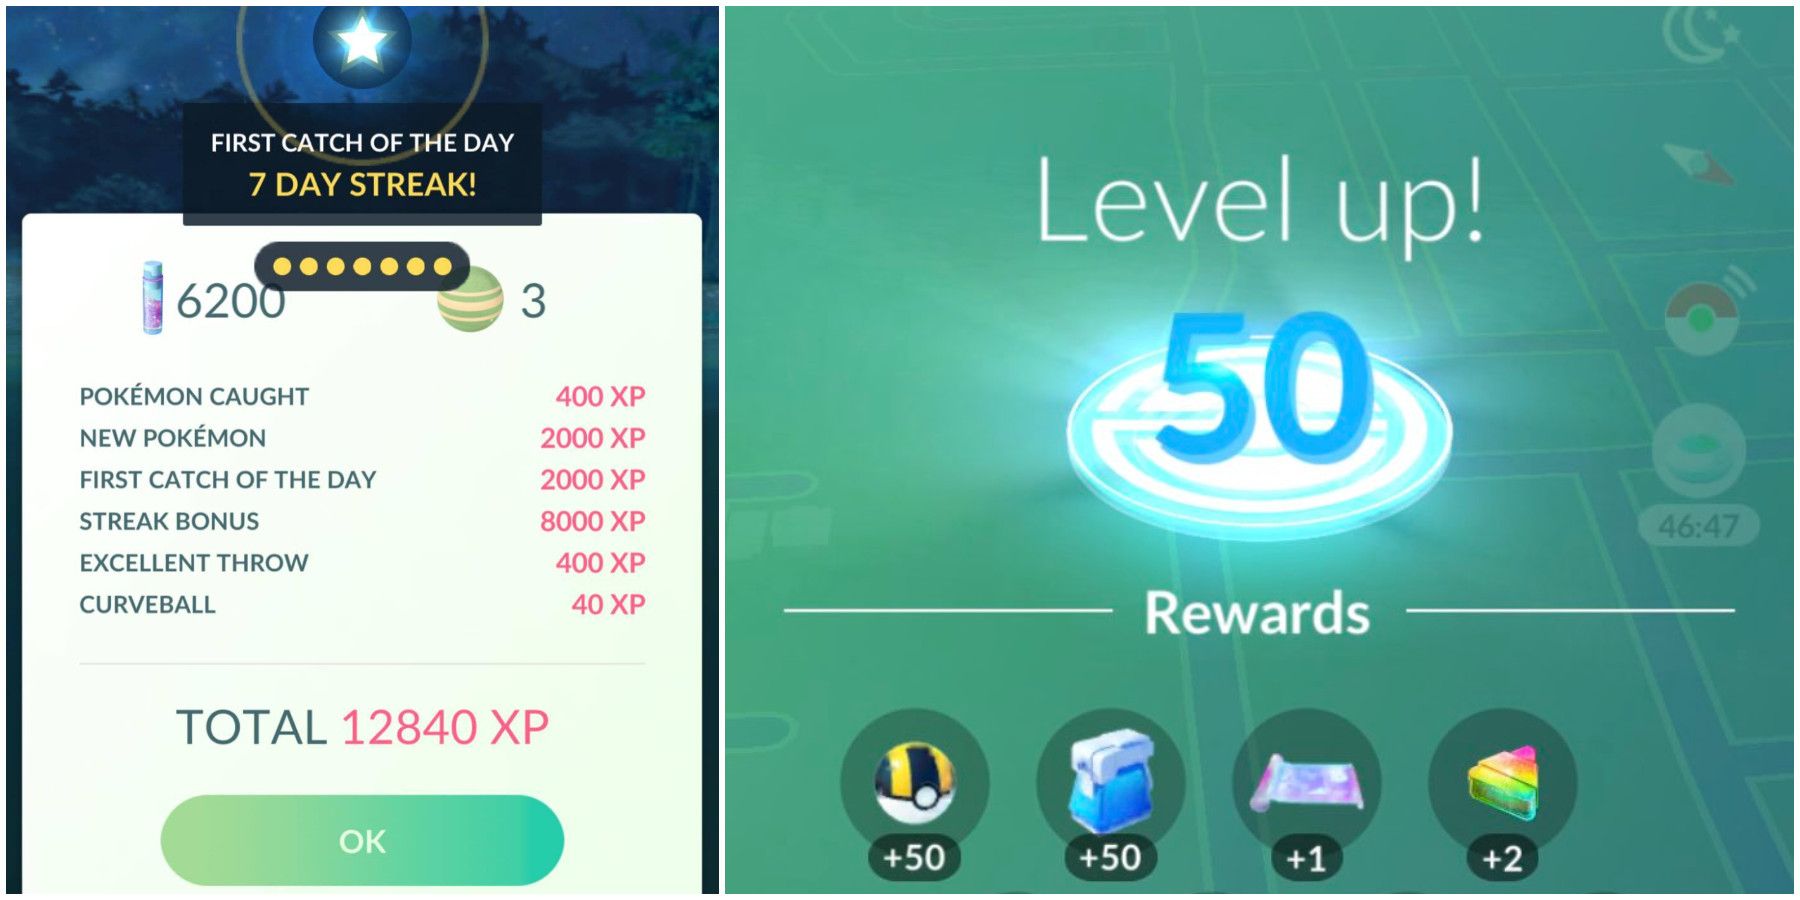 Pokemon Go: Rewards, XP, and unlockable items for every level